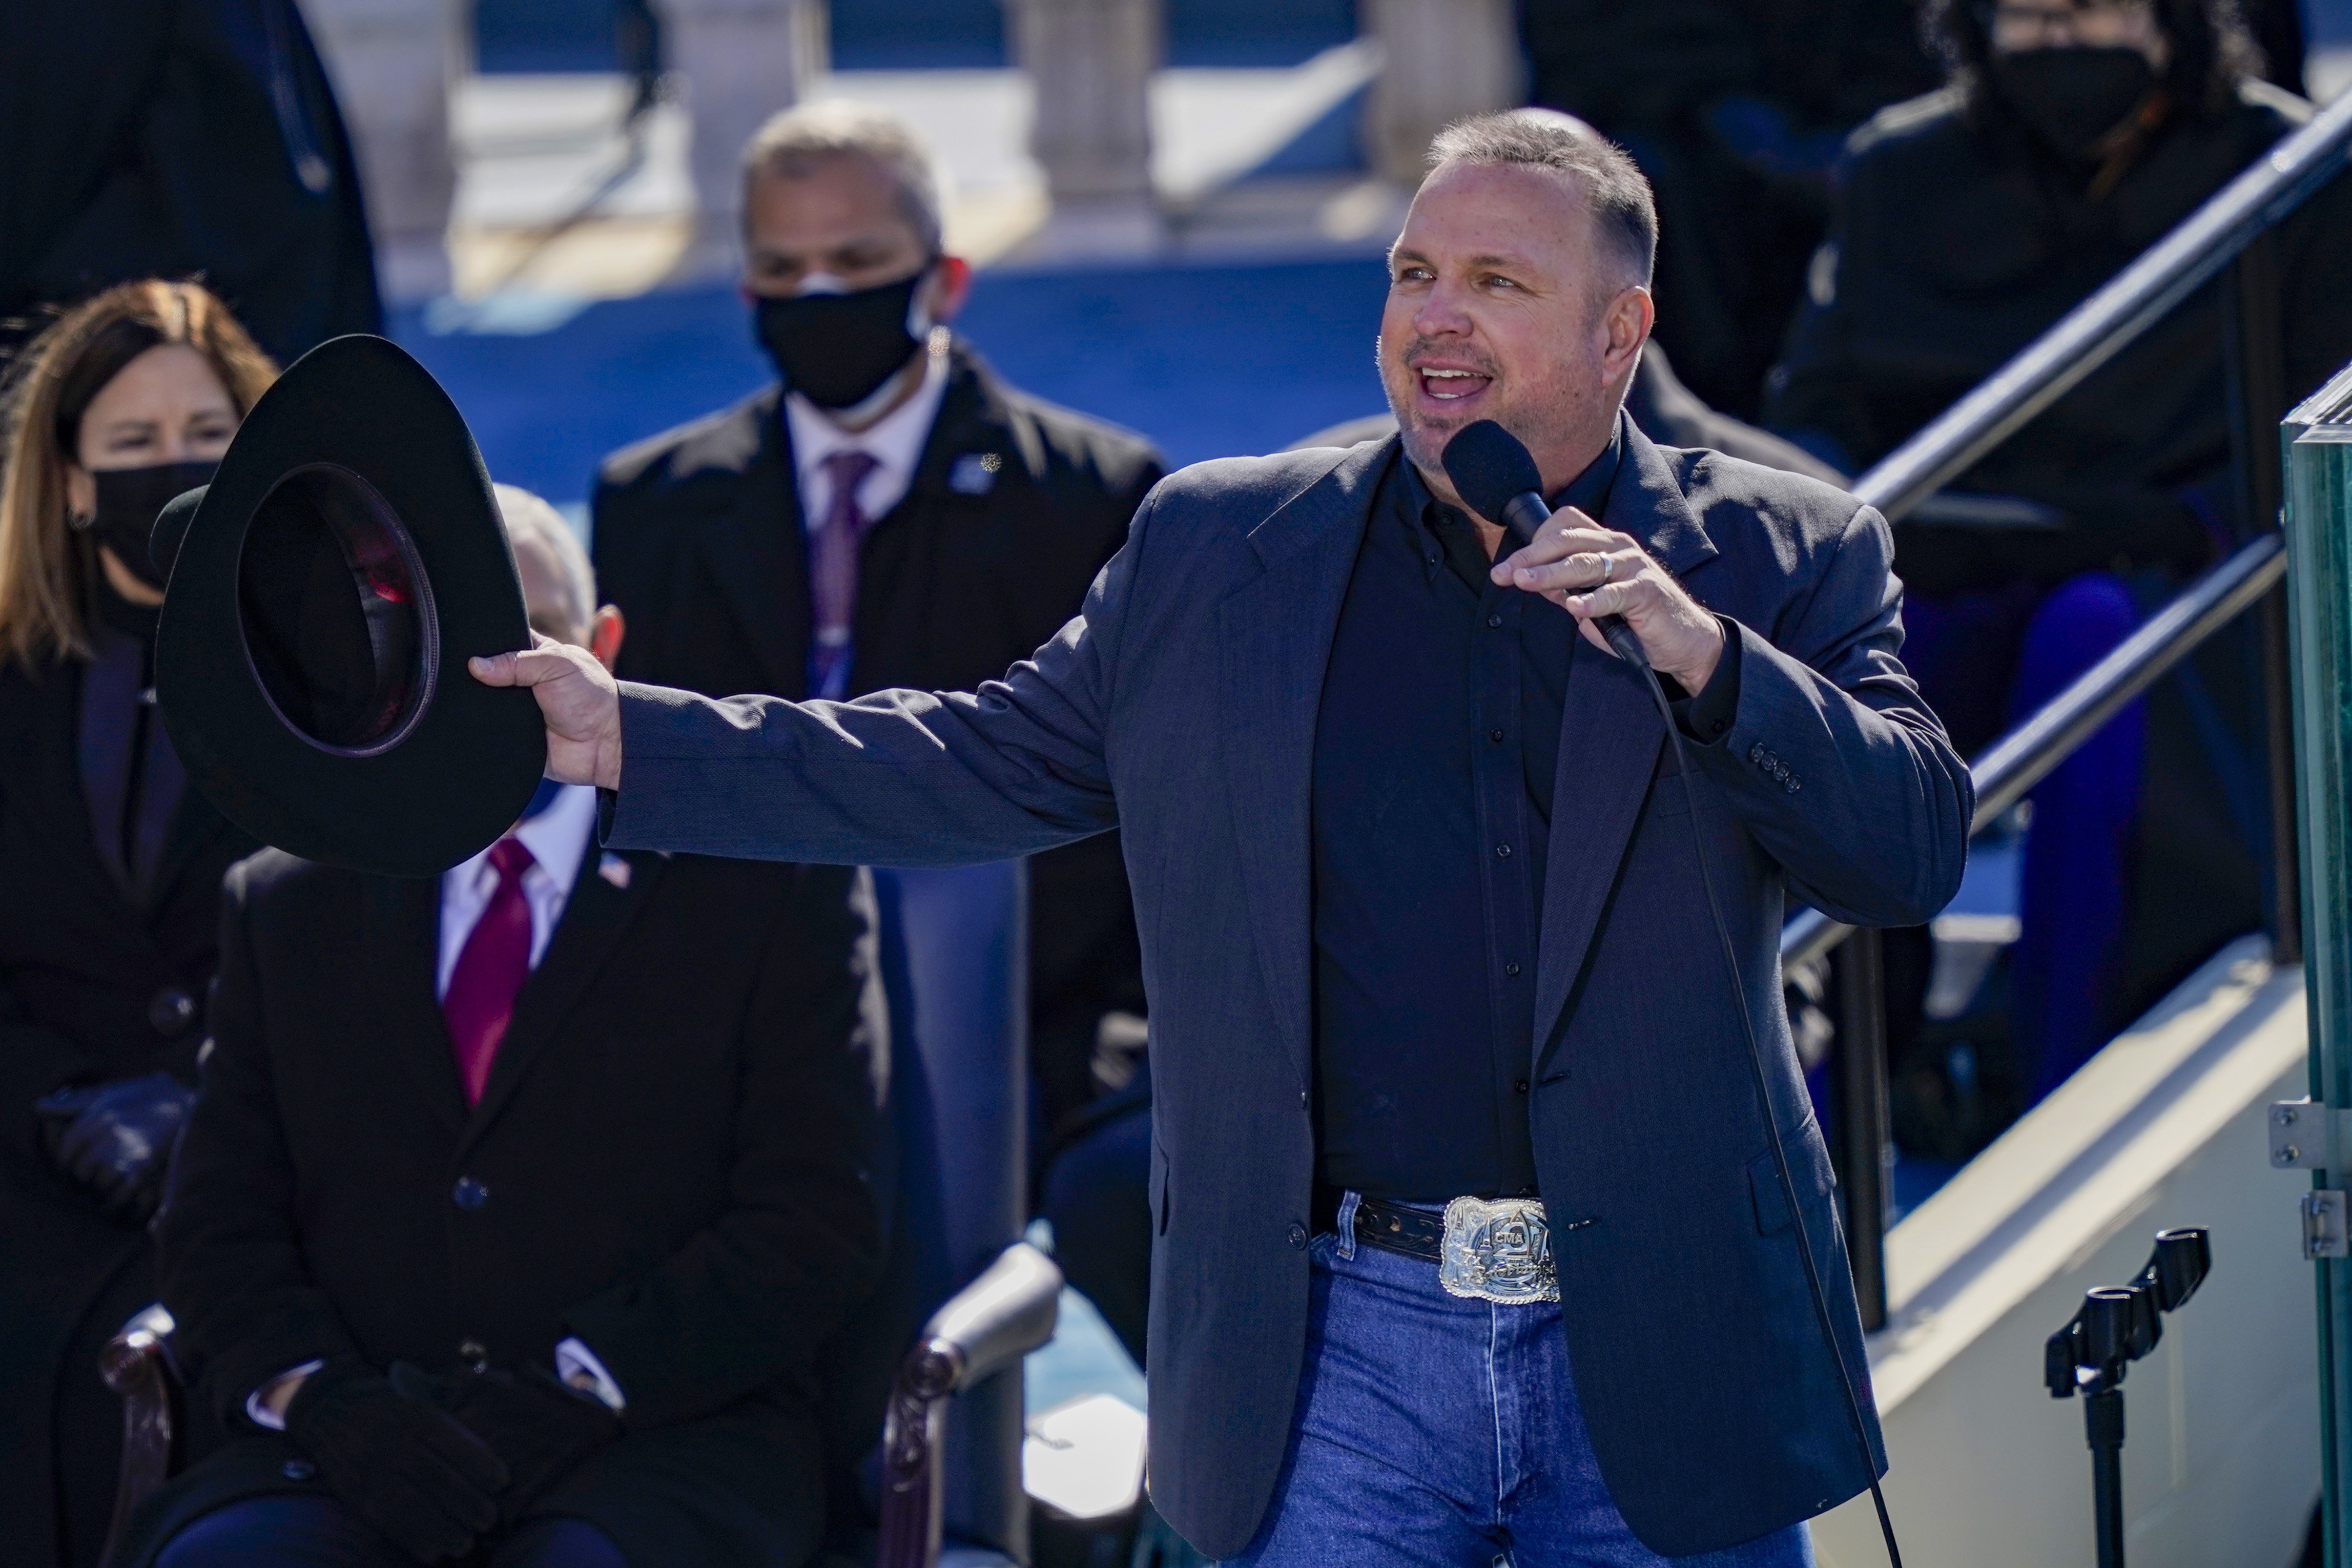 Garth Brooks pictured performing at the Inauguration of the 46th President of the United States. January 2021. | Photo: Getty Images.